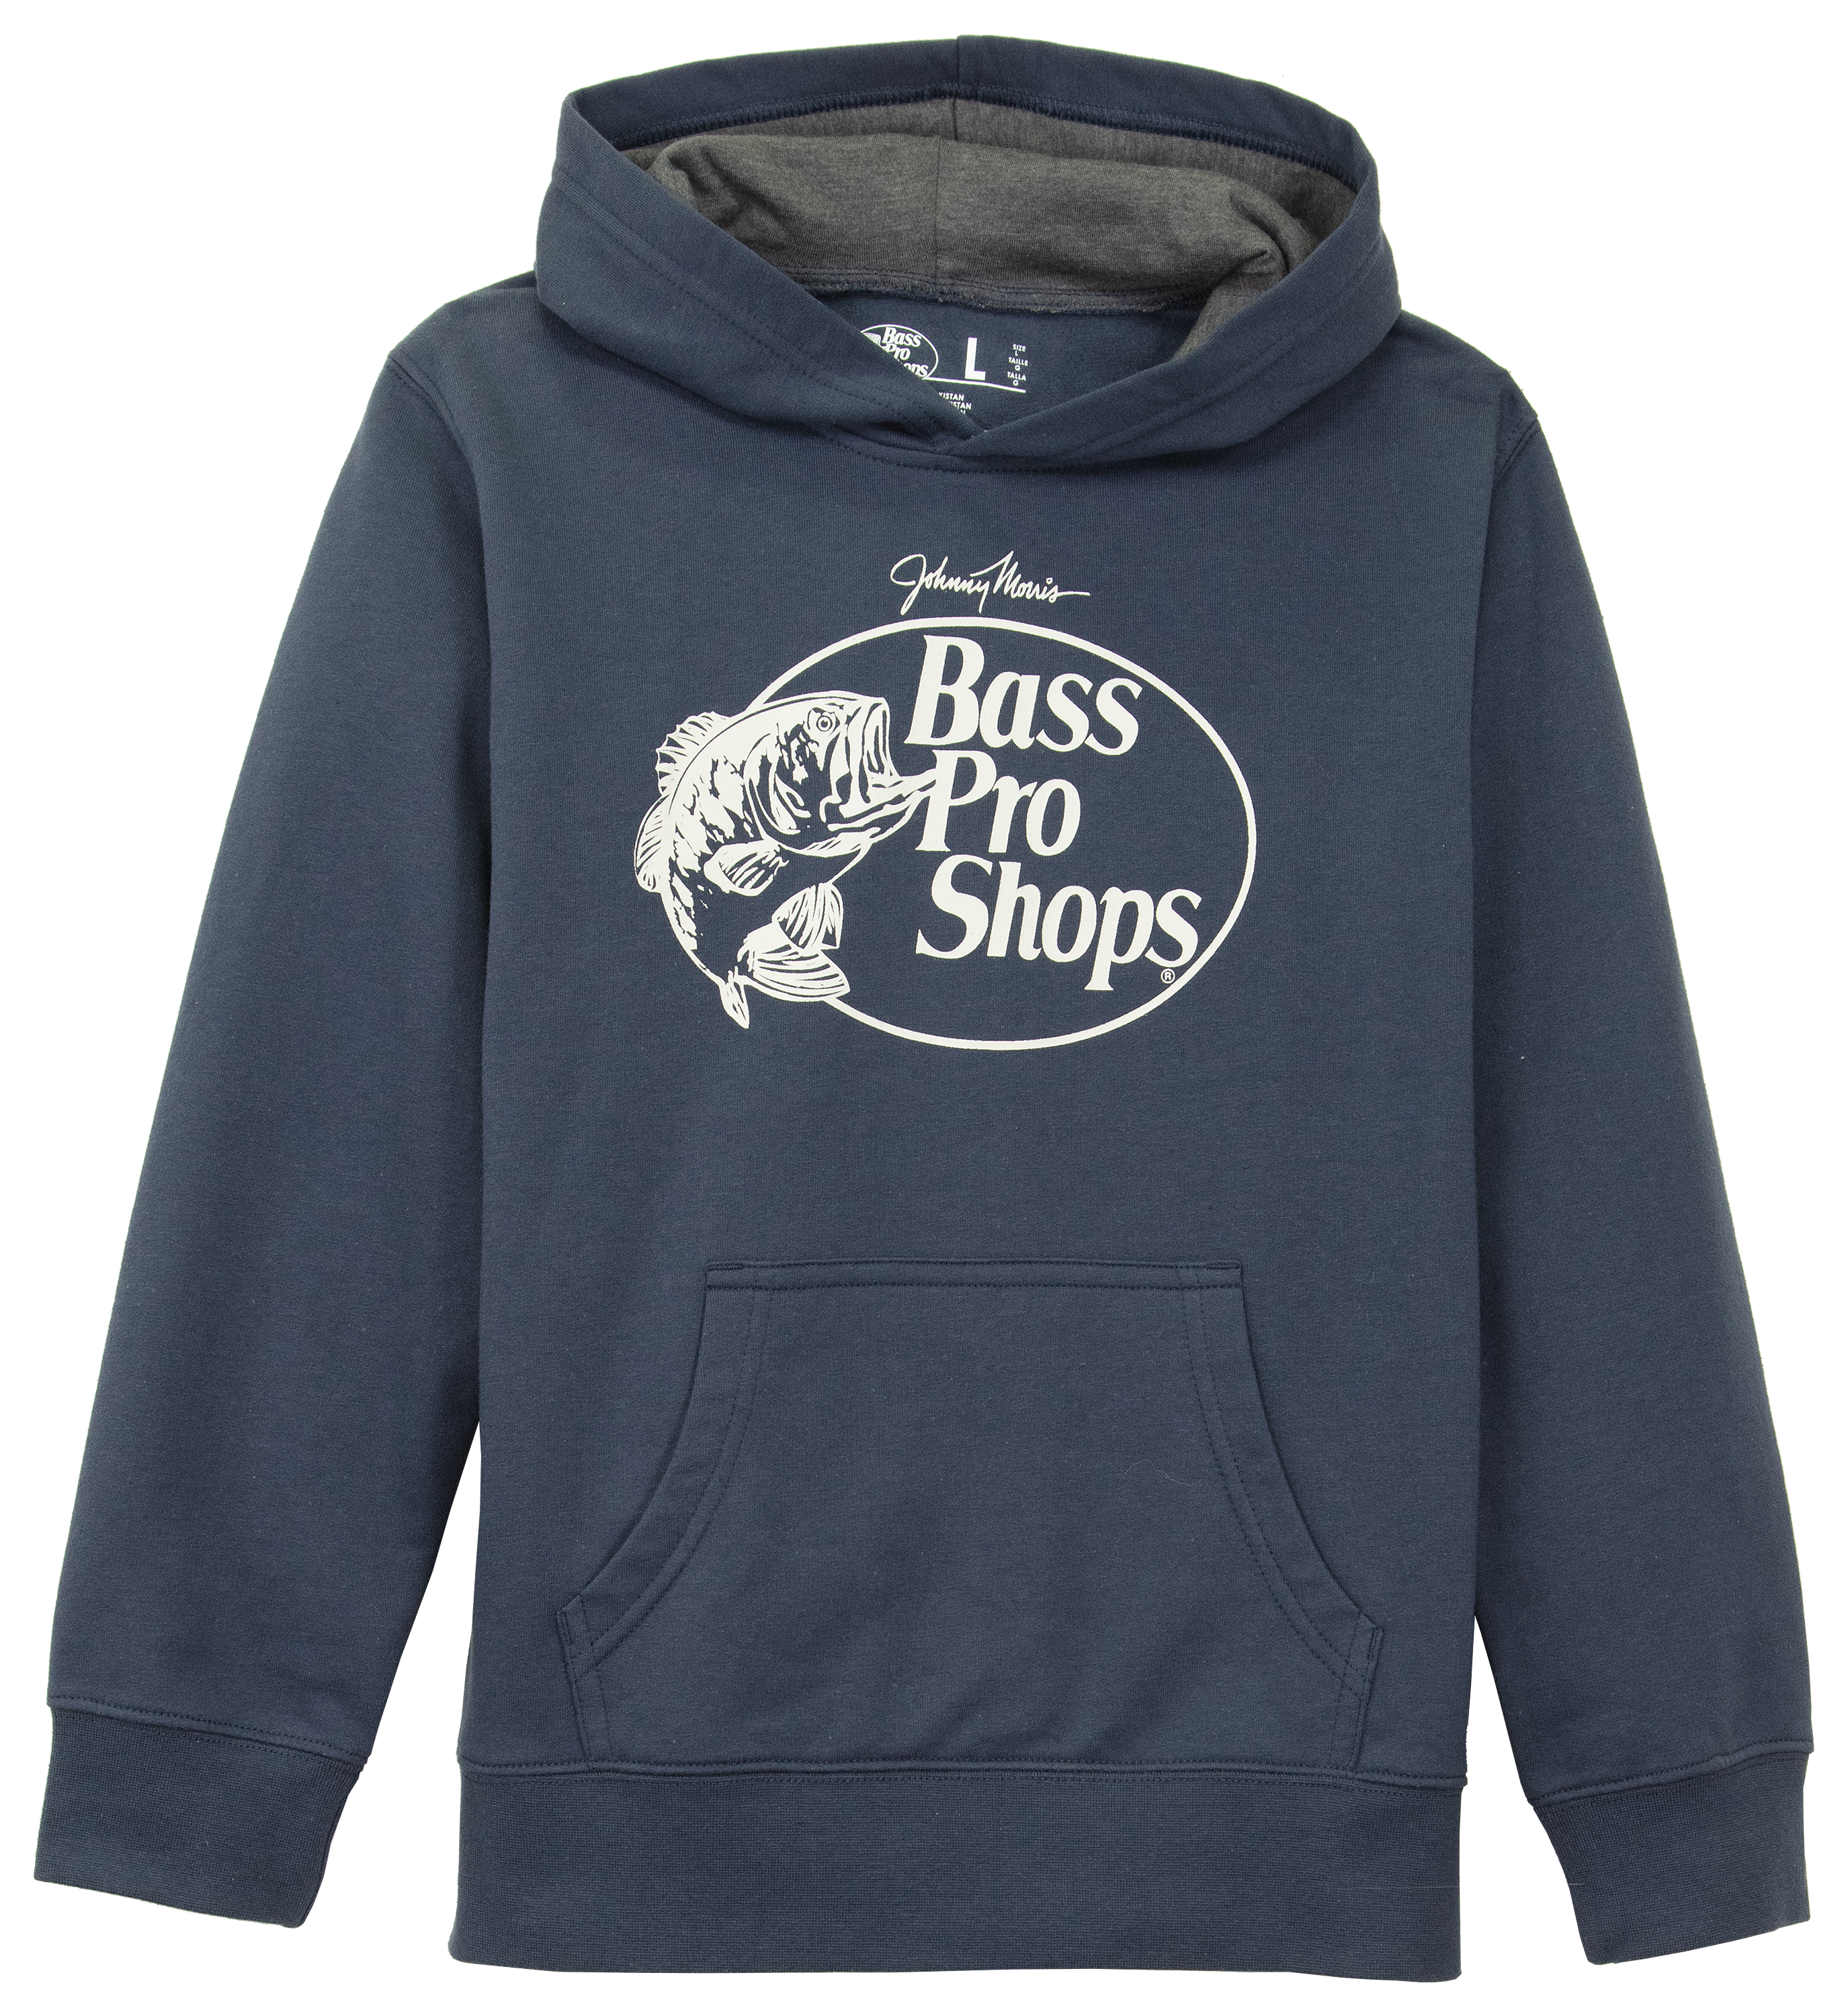 Bass Pro Shops Long-Sleeve Hoodie for Toddlers or Boys